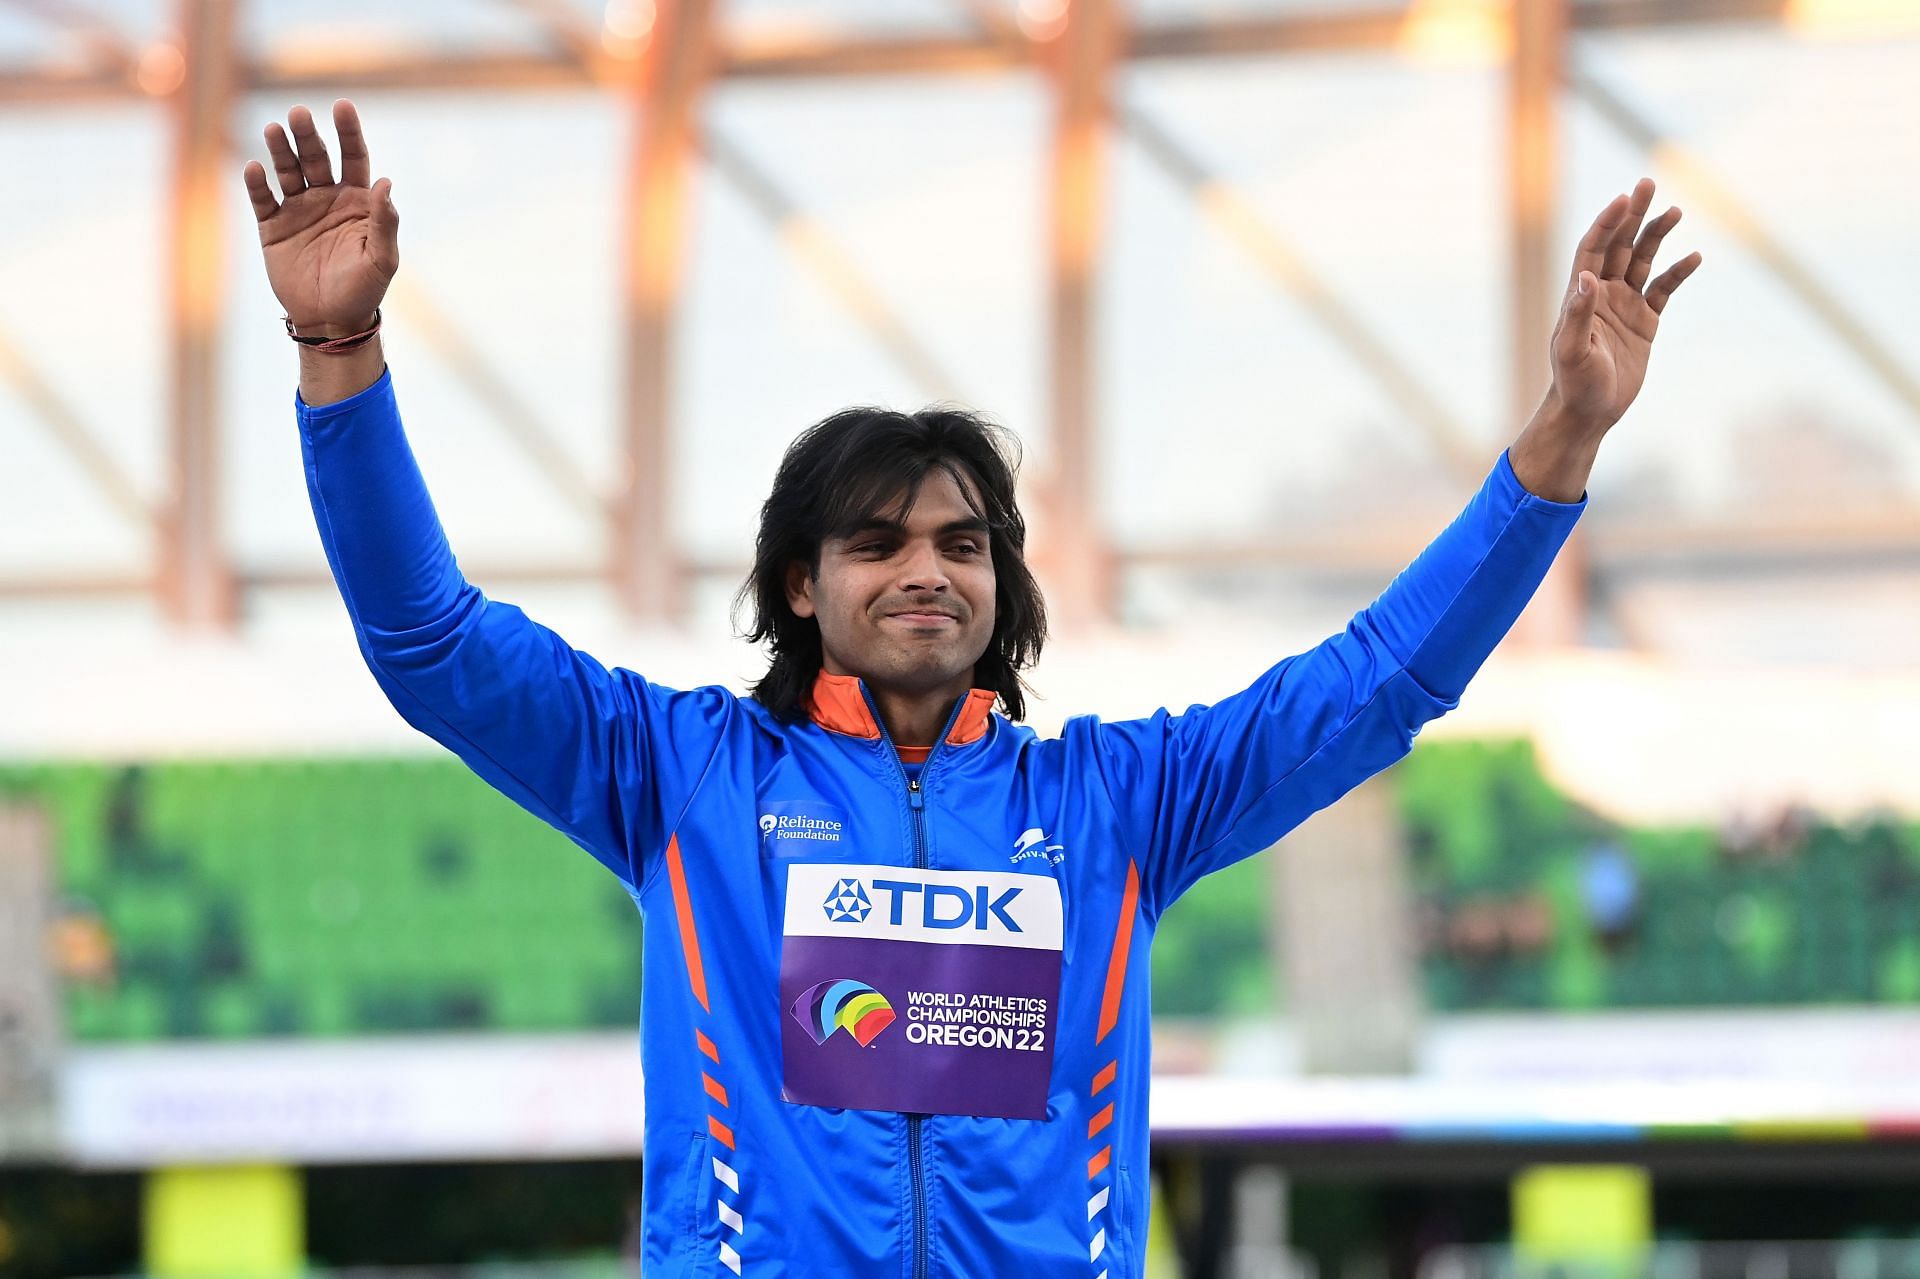 Neeraj Chopra exults after winning the silver at the World Athletics Championships. (PC: Getty Images)